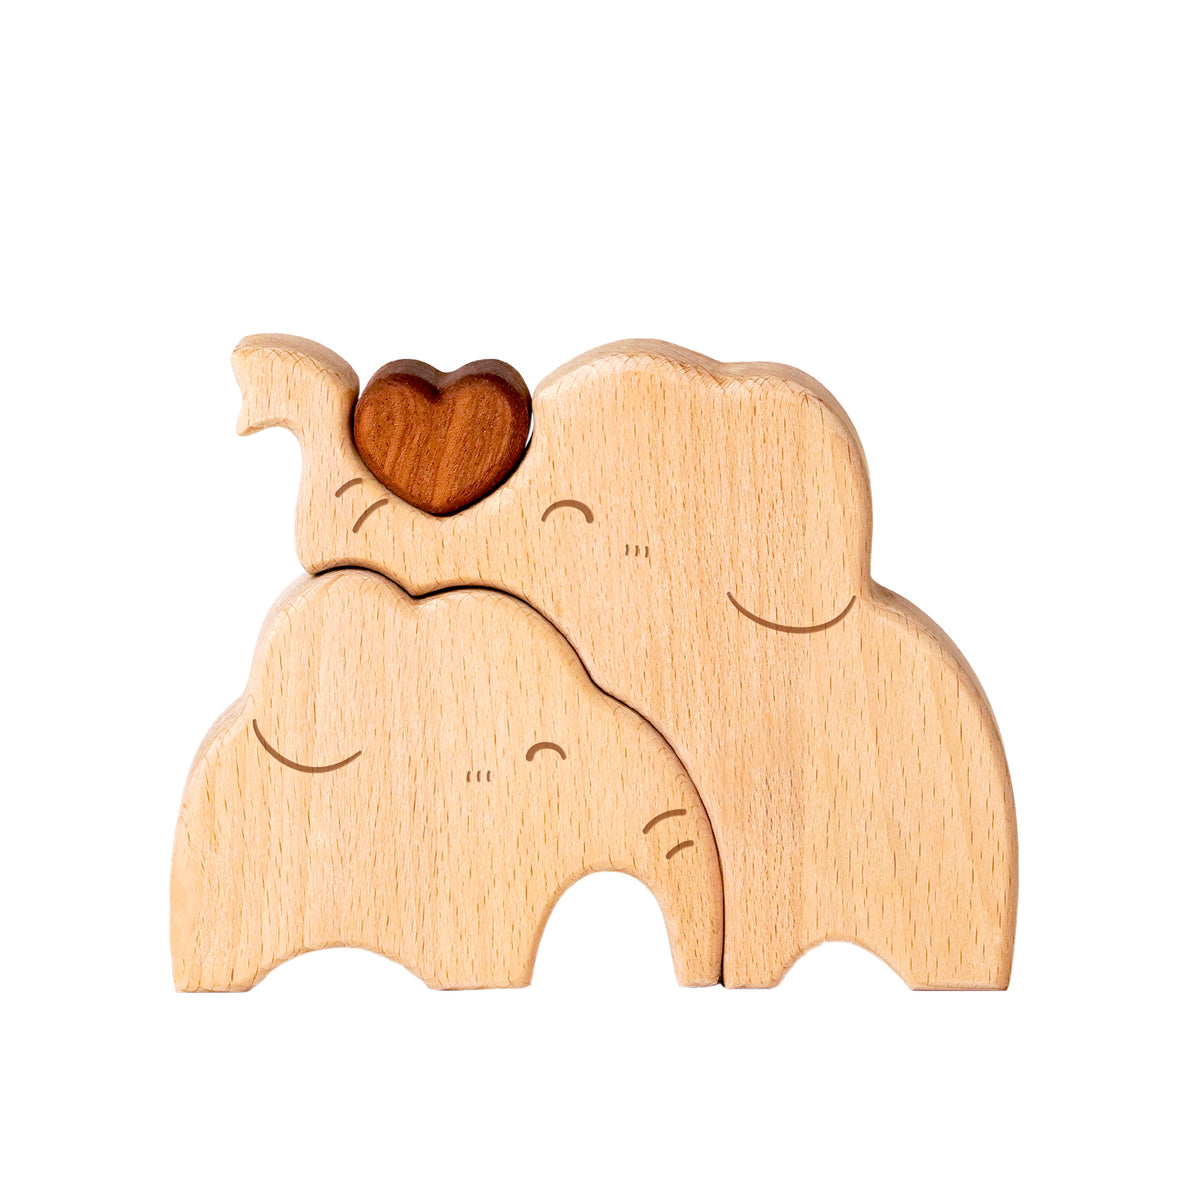 Elephant Family Puzzle, Personalized Wooden Puzzles with 2-5 Family Members Names, Unique Family Decor Wood Sculpture Gifts for Mom Grandma